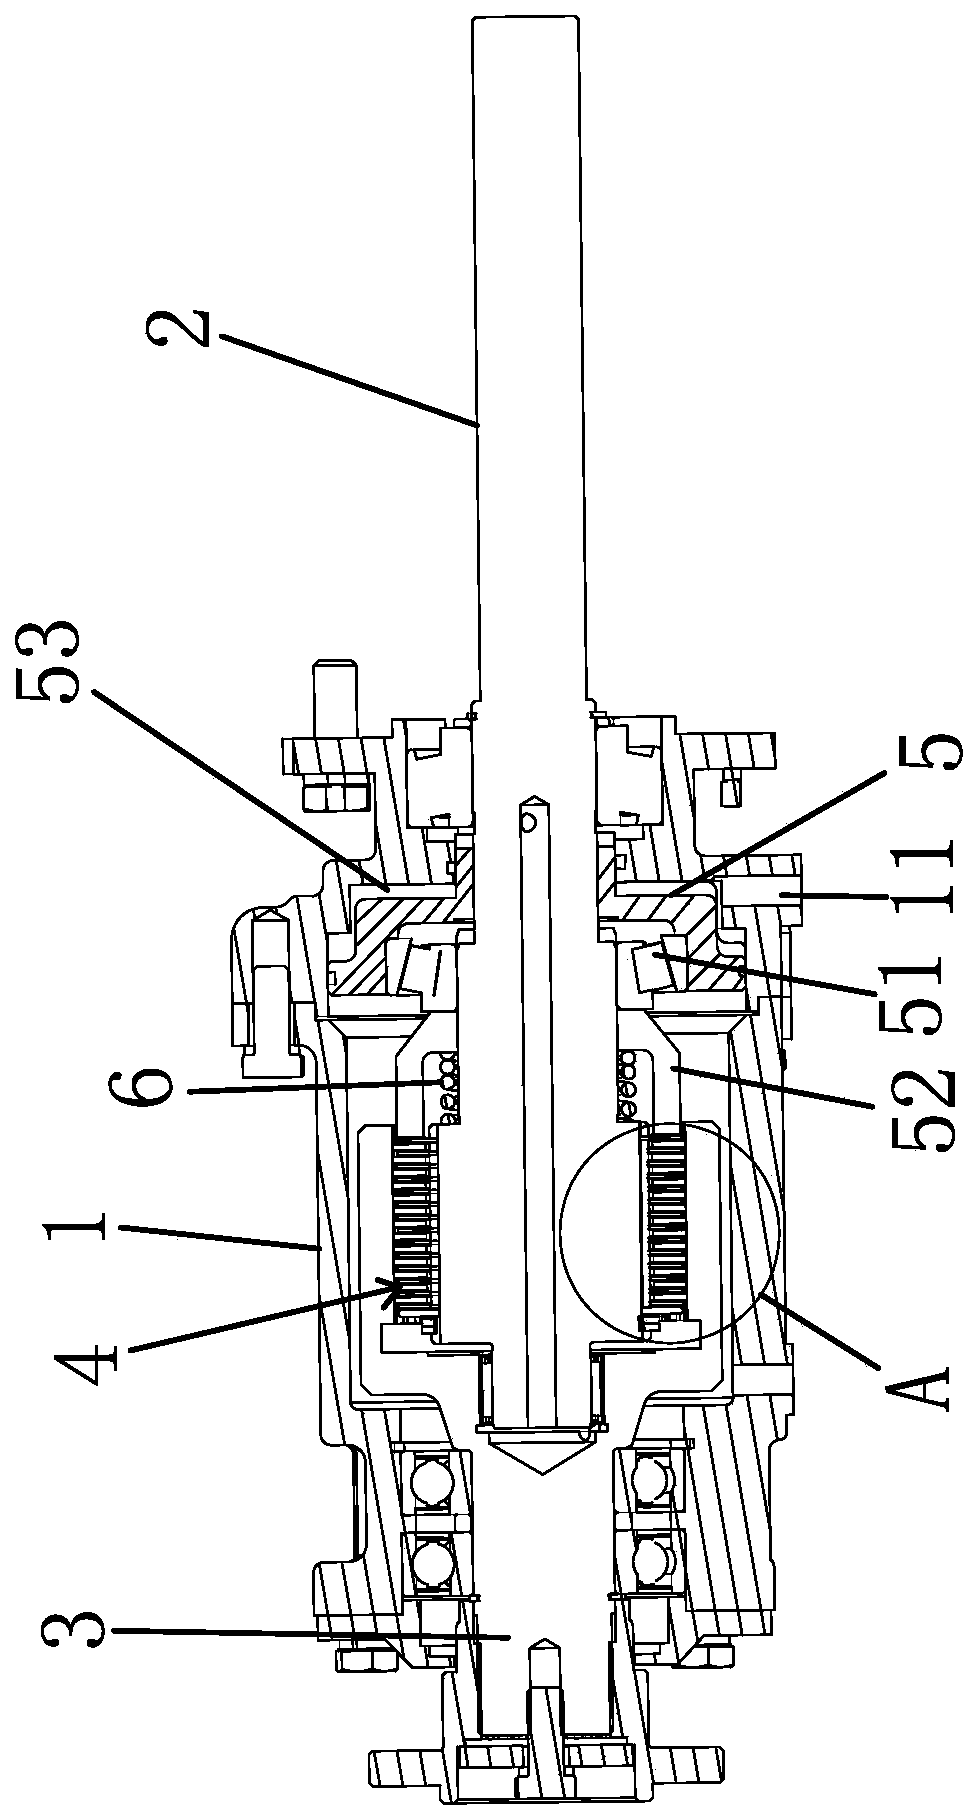 Direct-connected multi-piece friction power take-off